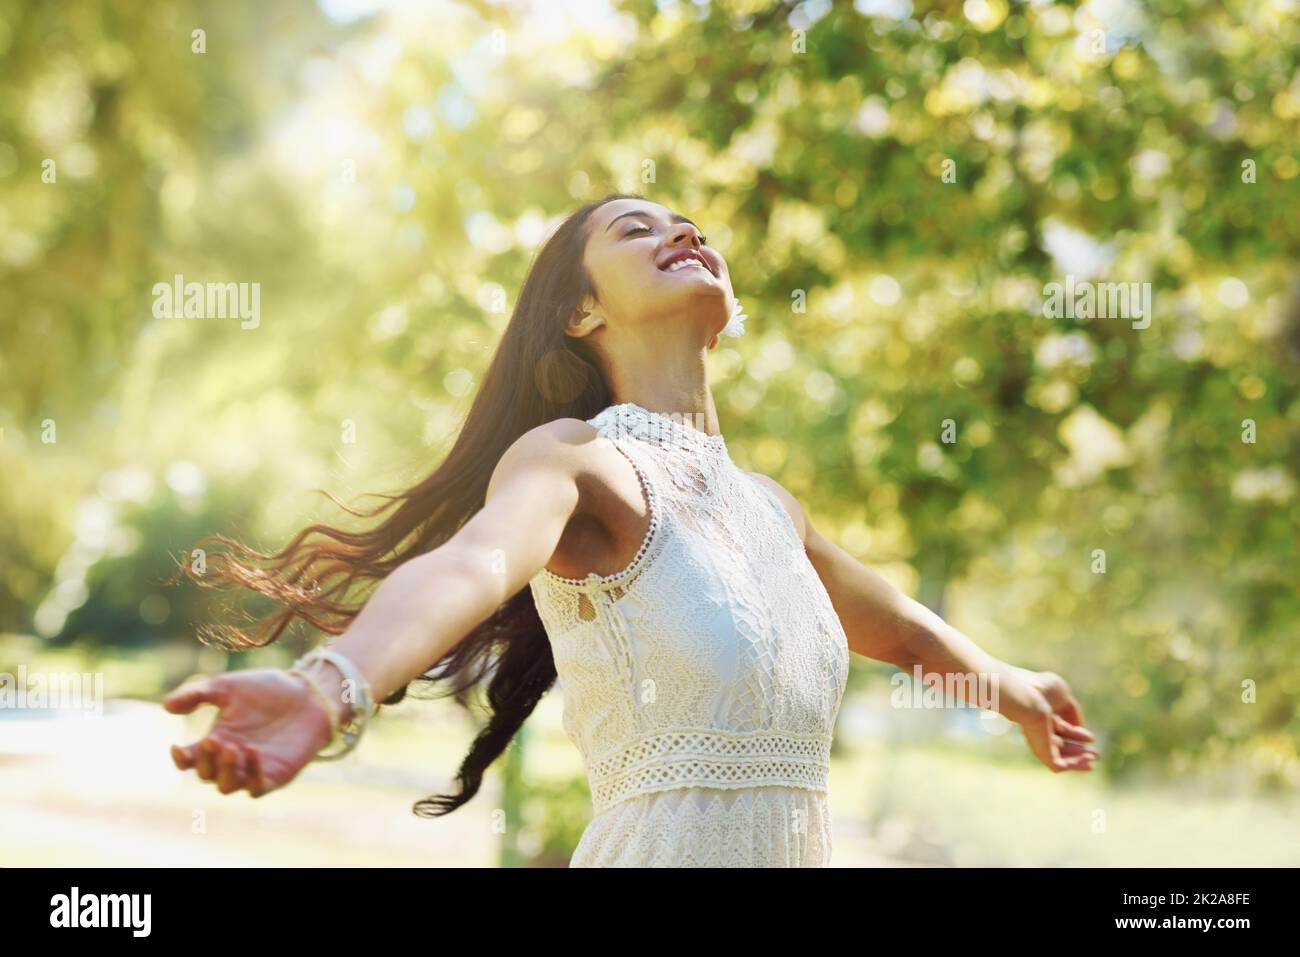 Carefree and full of joy. A carefree woman standing with her arms open in the park. Stock Photo